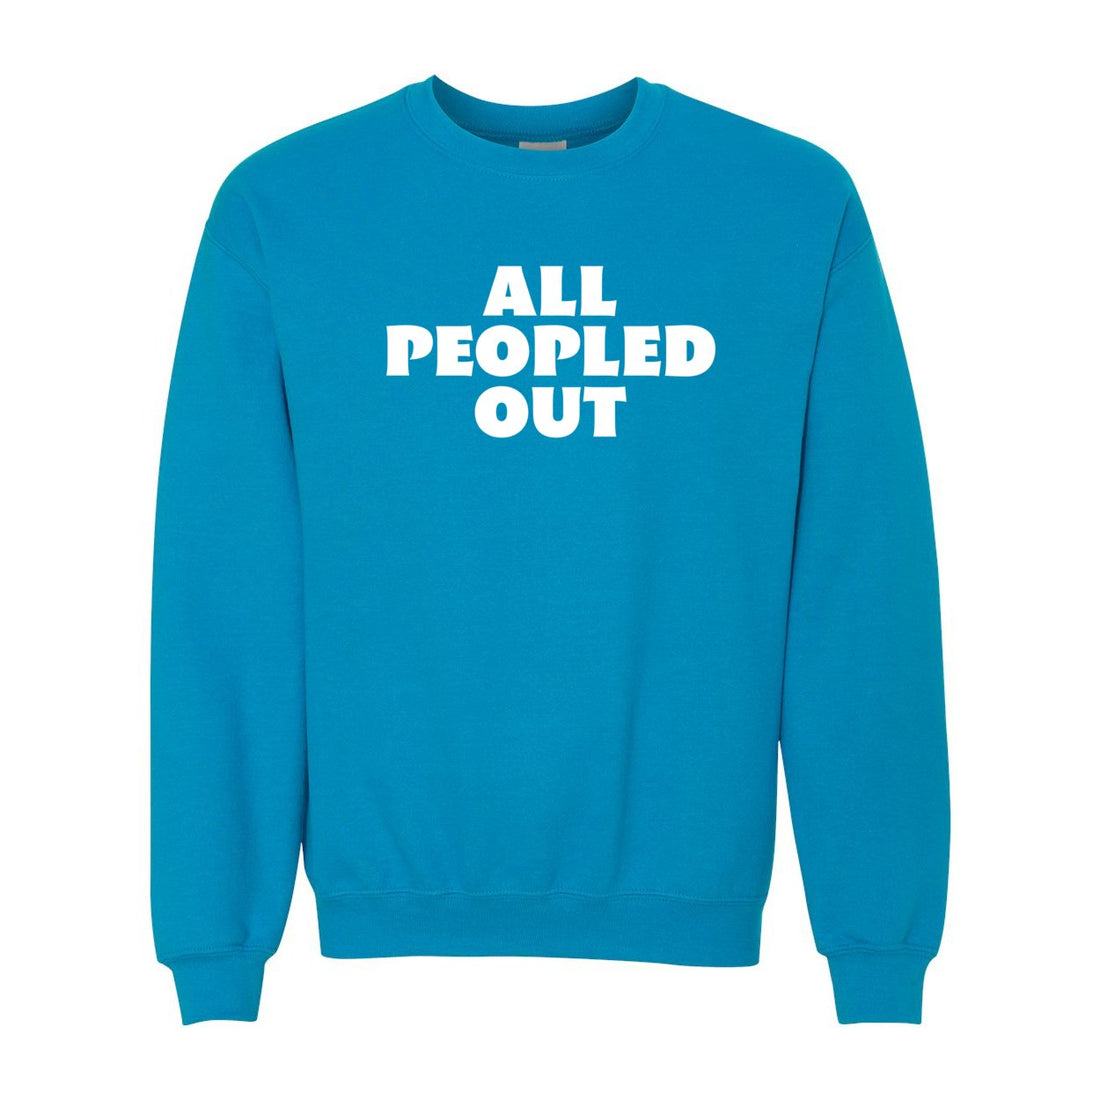 All Peopled Out Crewneck Sweatshirt - Sweaters/Hoodies - Positively Sassy - All Peopled Out Crewneck Sweatshirt